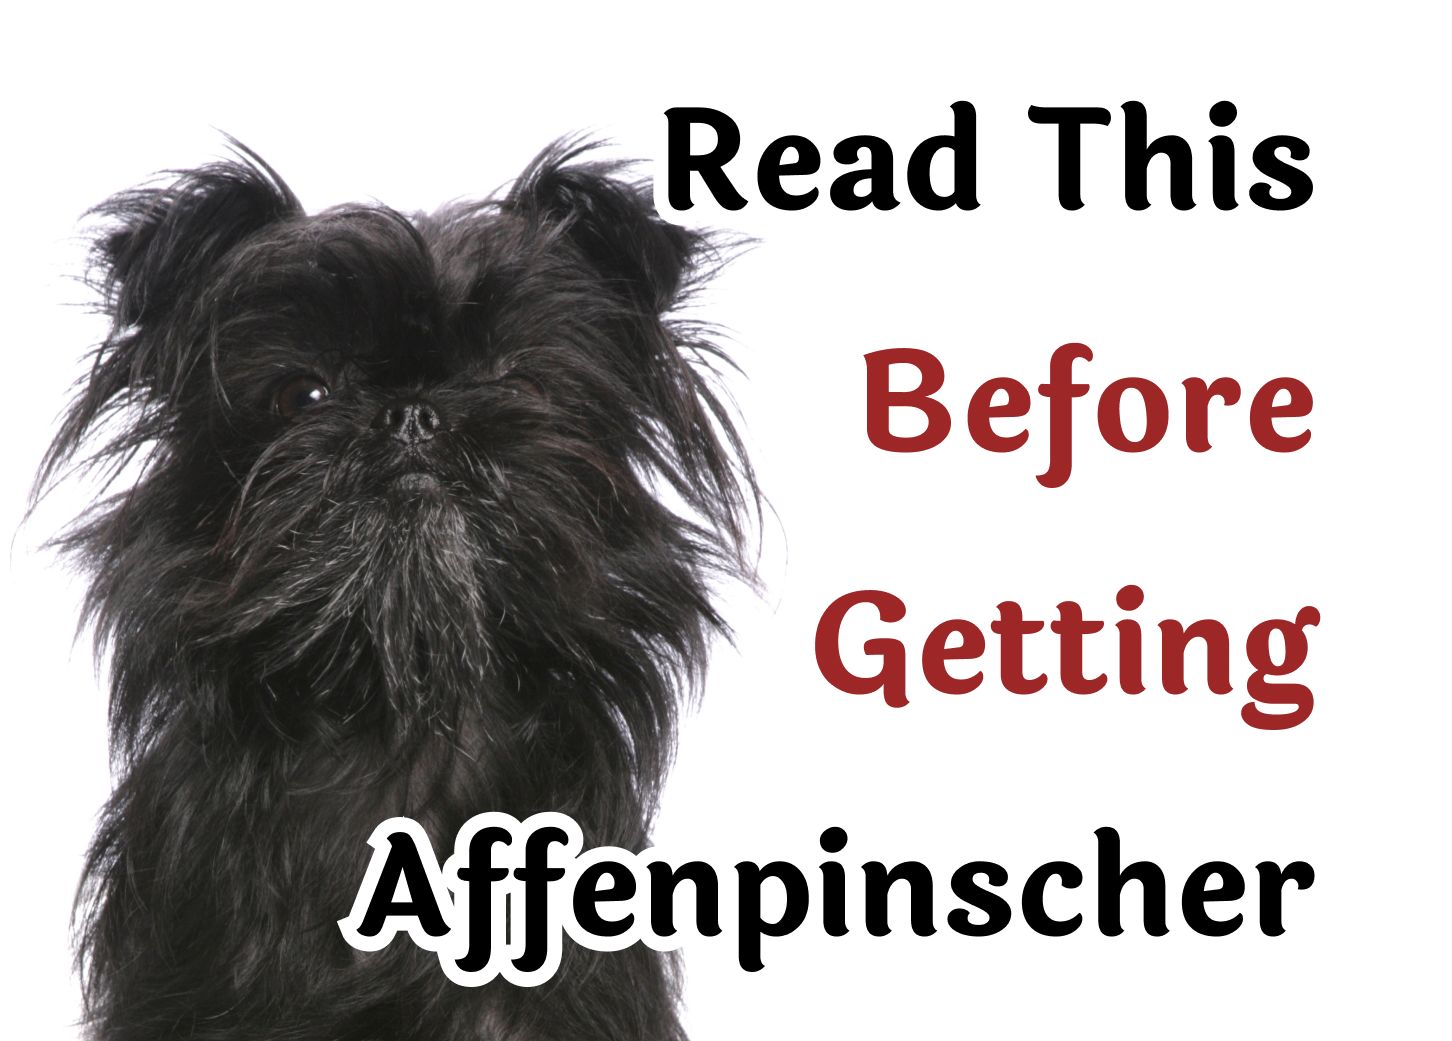 What You Should Know Before Getting an Affenpinscher